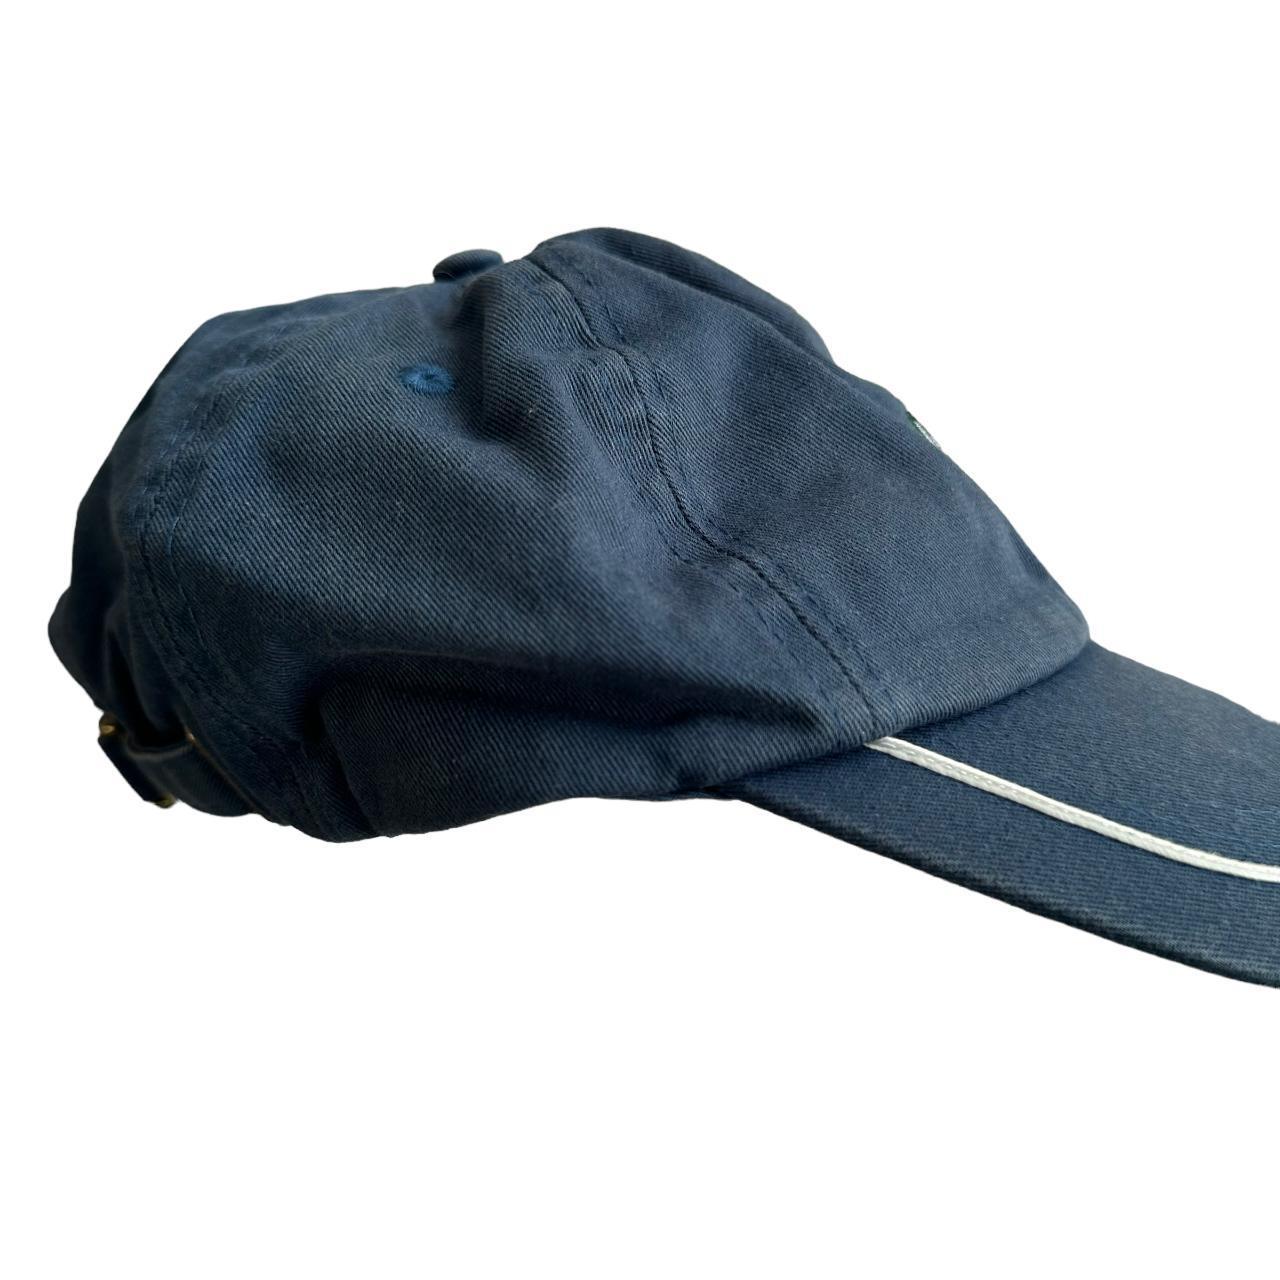 Stussy navy Gucci style Hat - Known Source